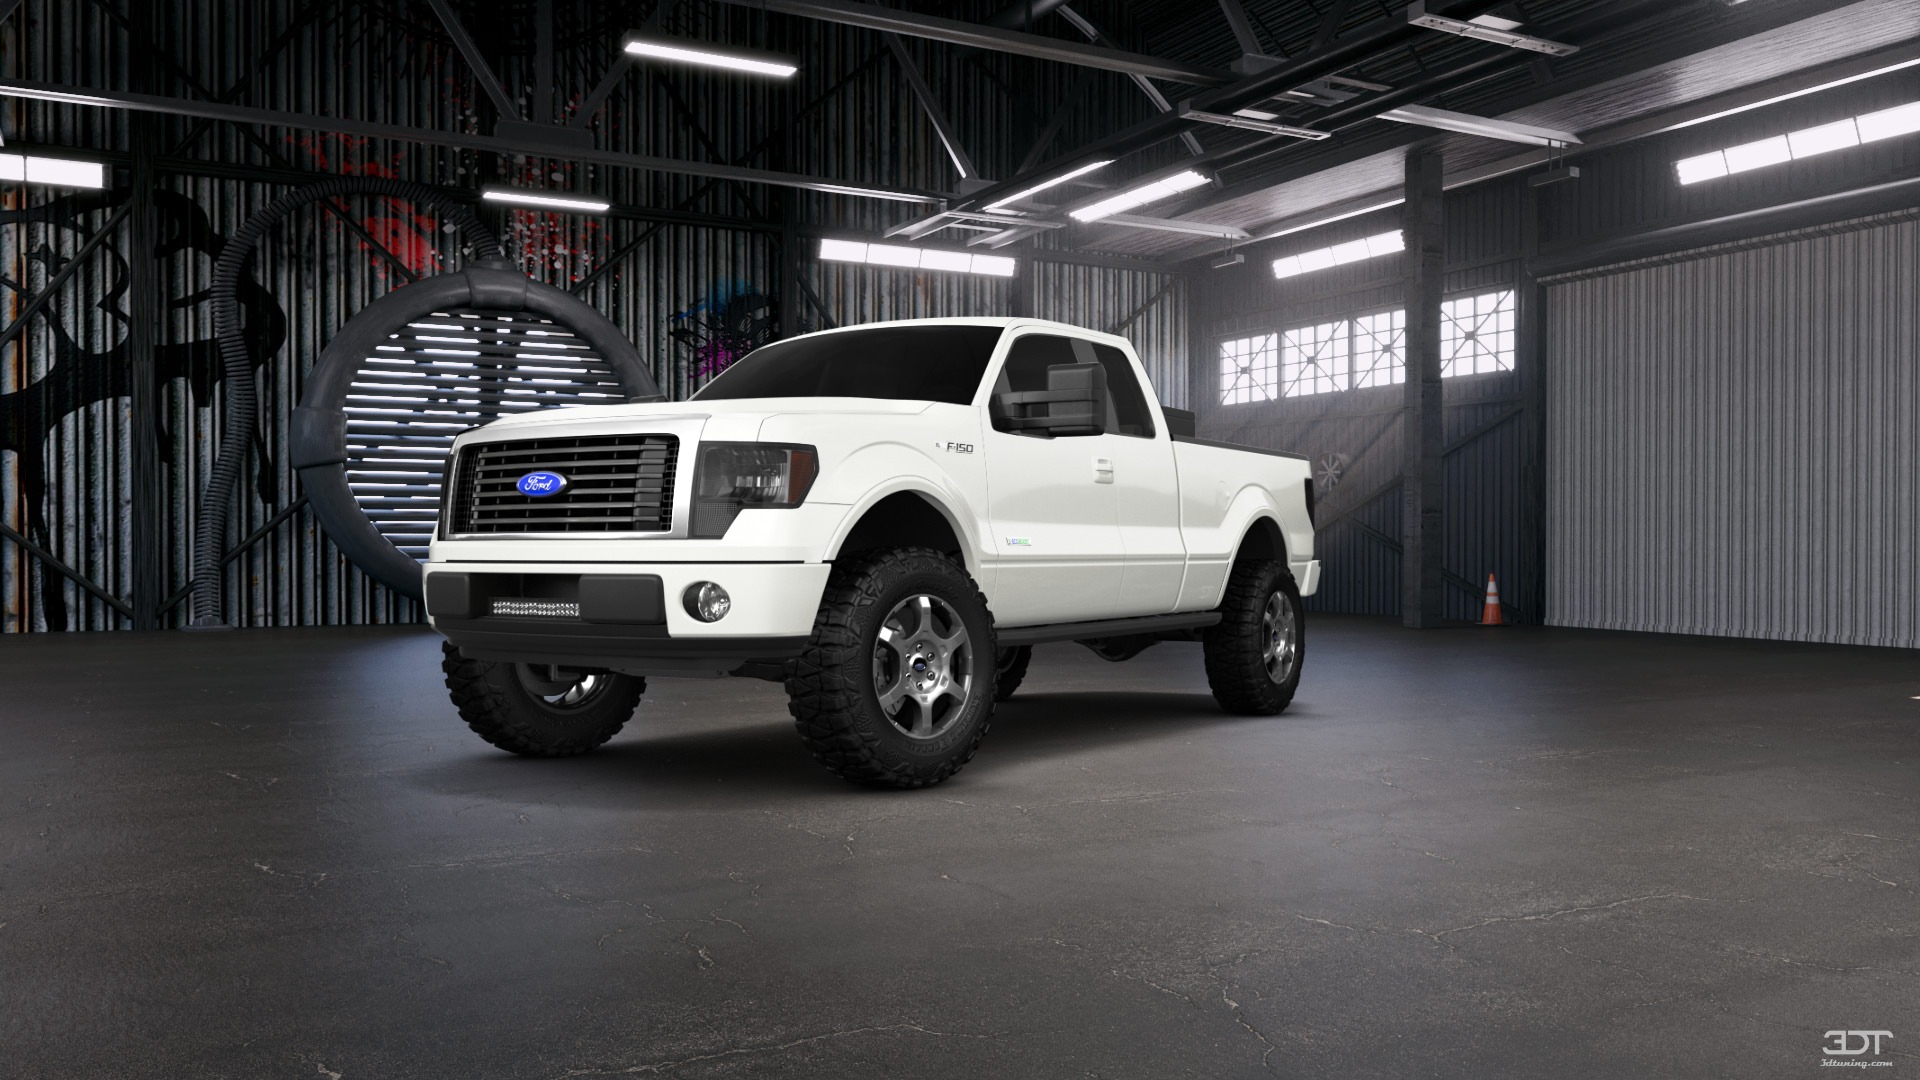 Ford F-150 SuperCab 4 Door pickup truck 2009 tuning